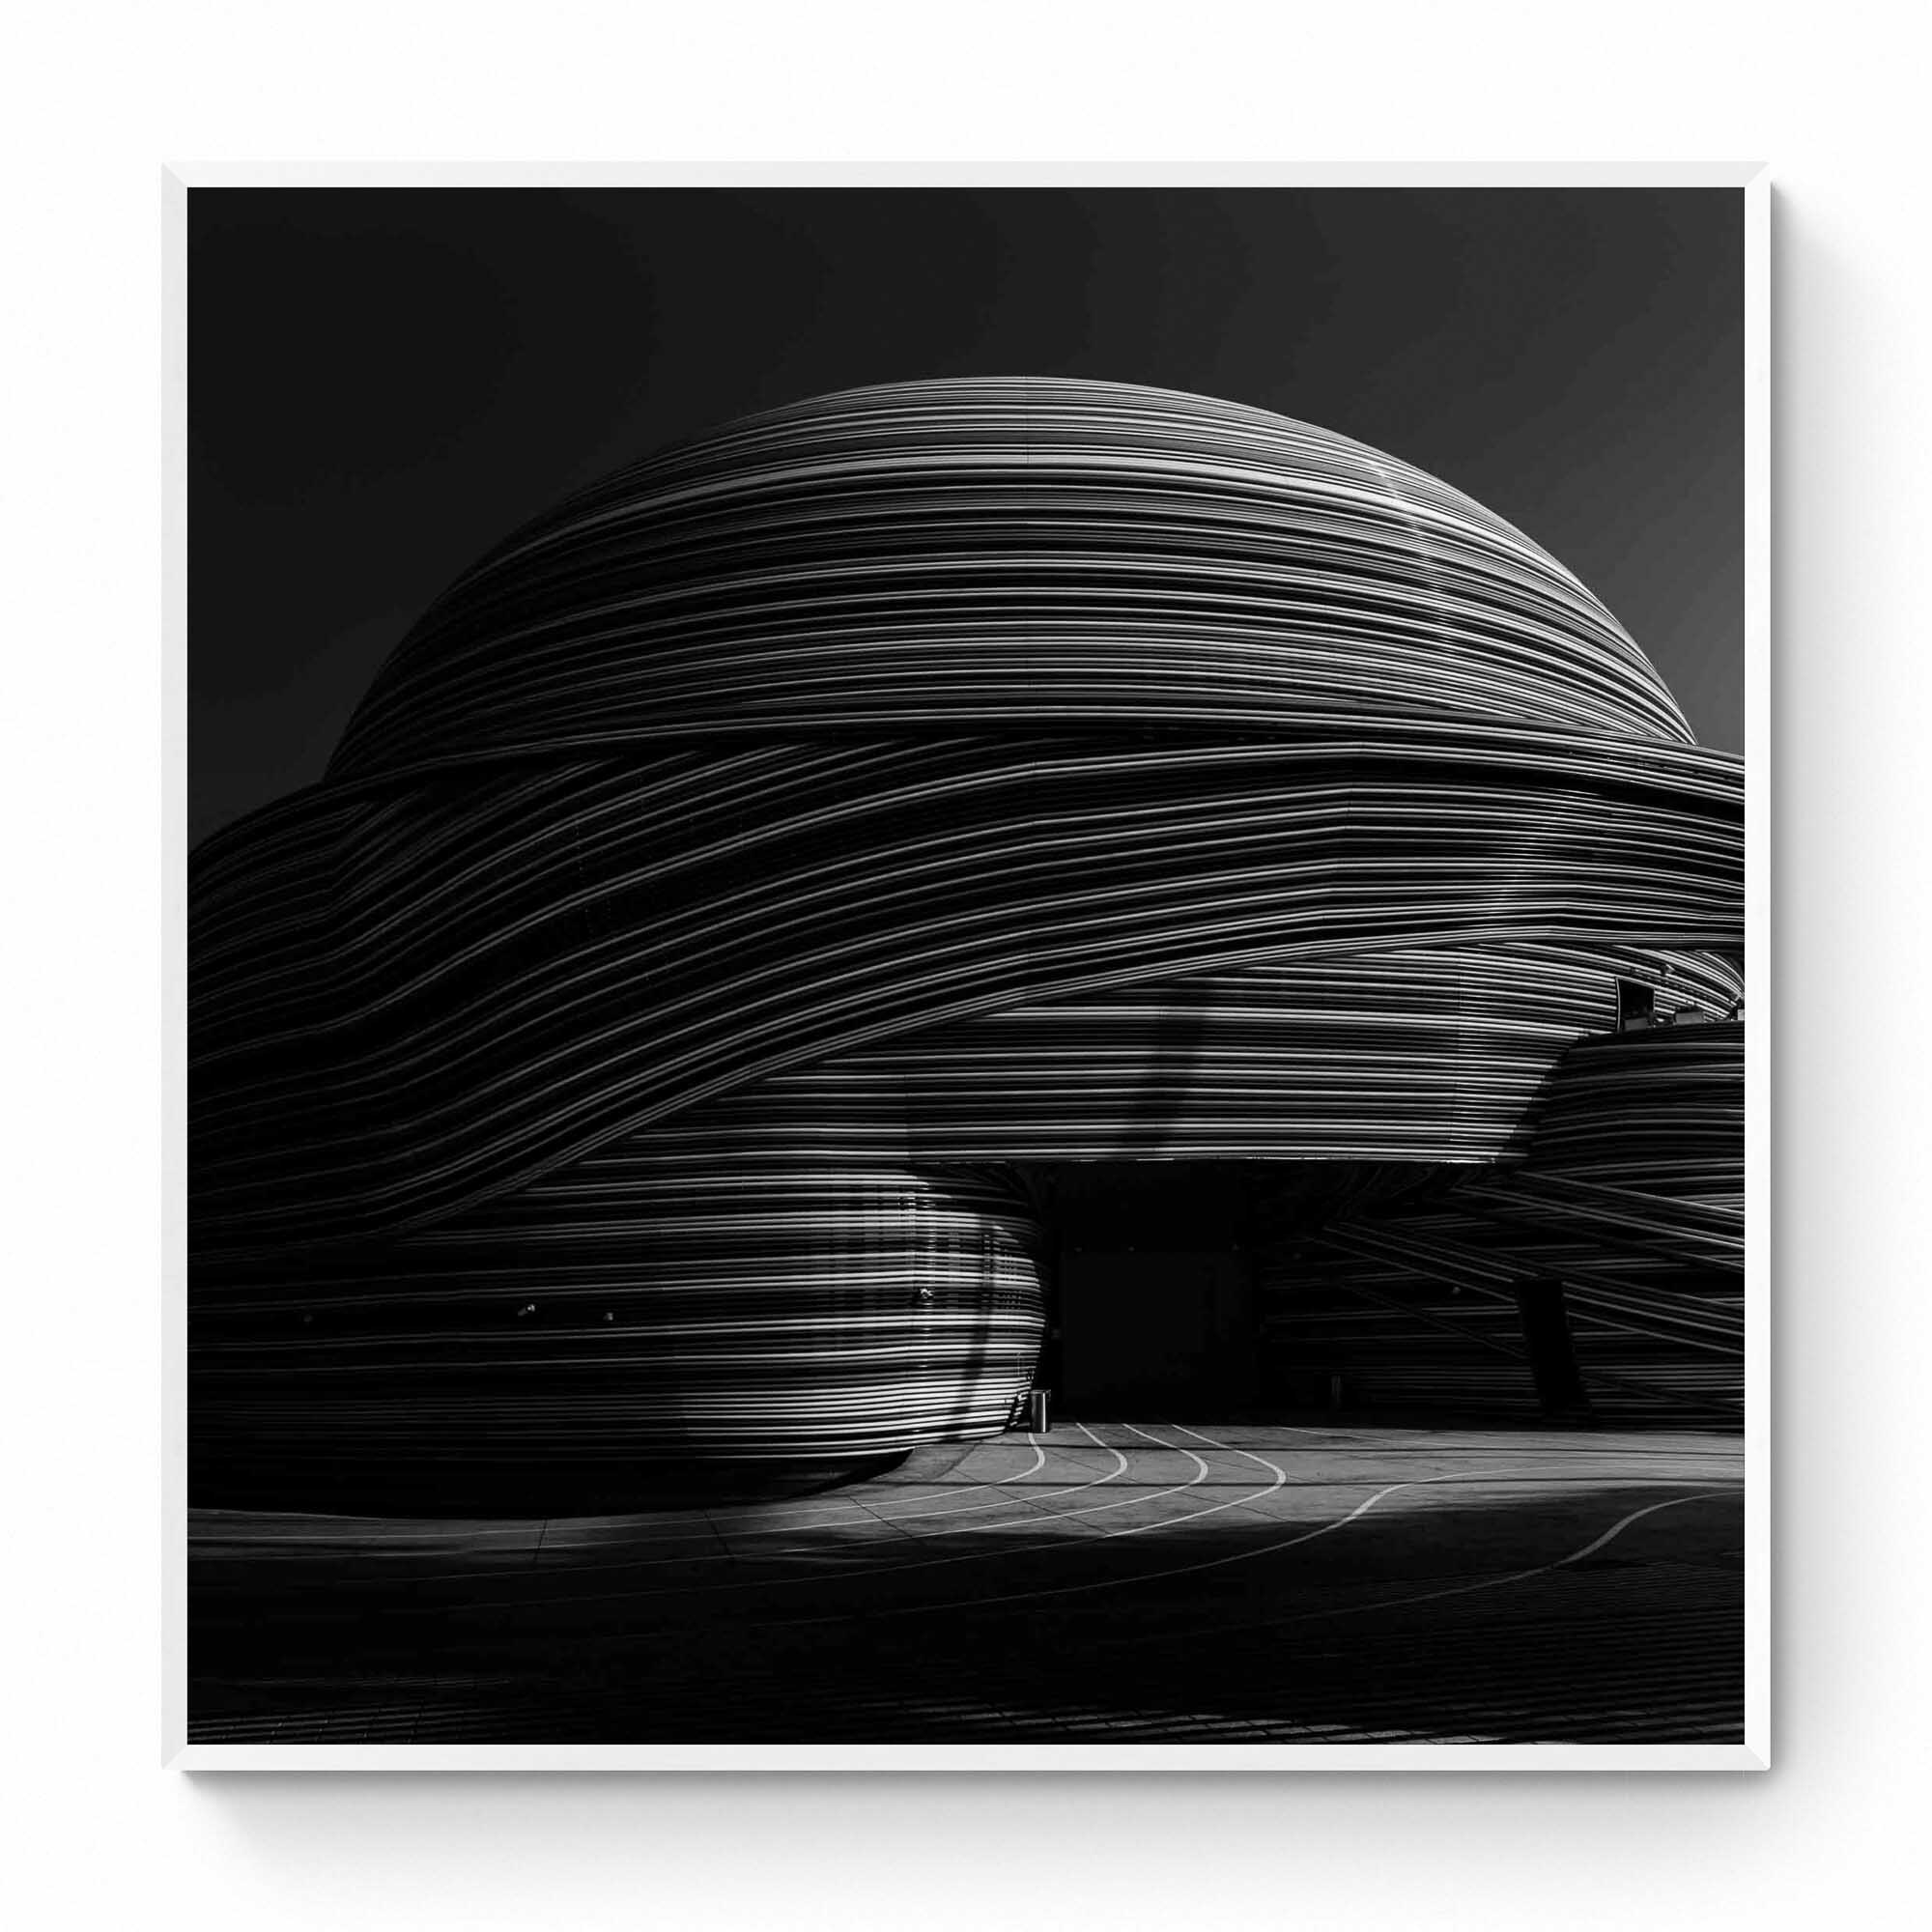 Black and white photo showcasing the striking, layered lines of the Russia Pavilion in Dubai.